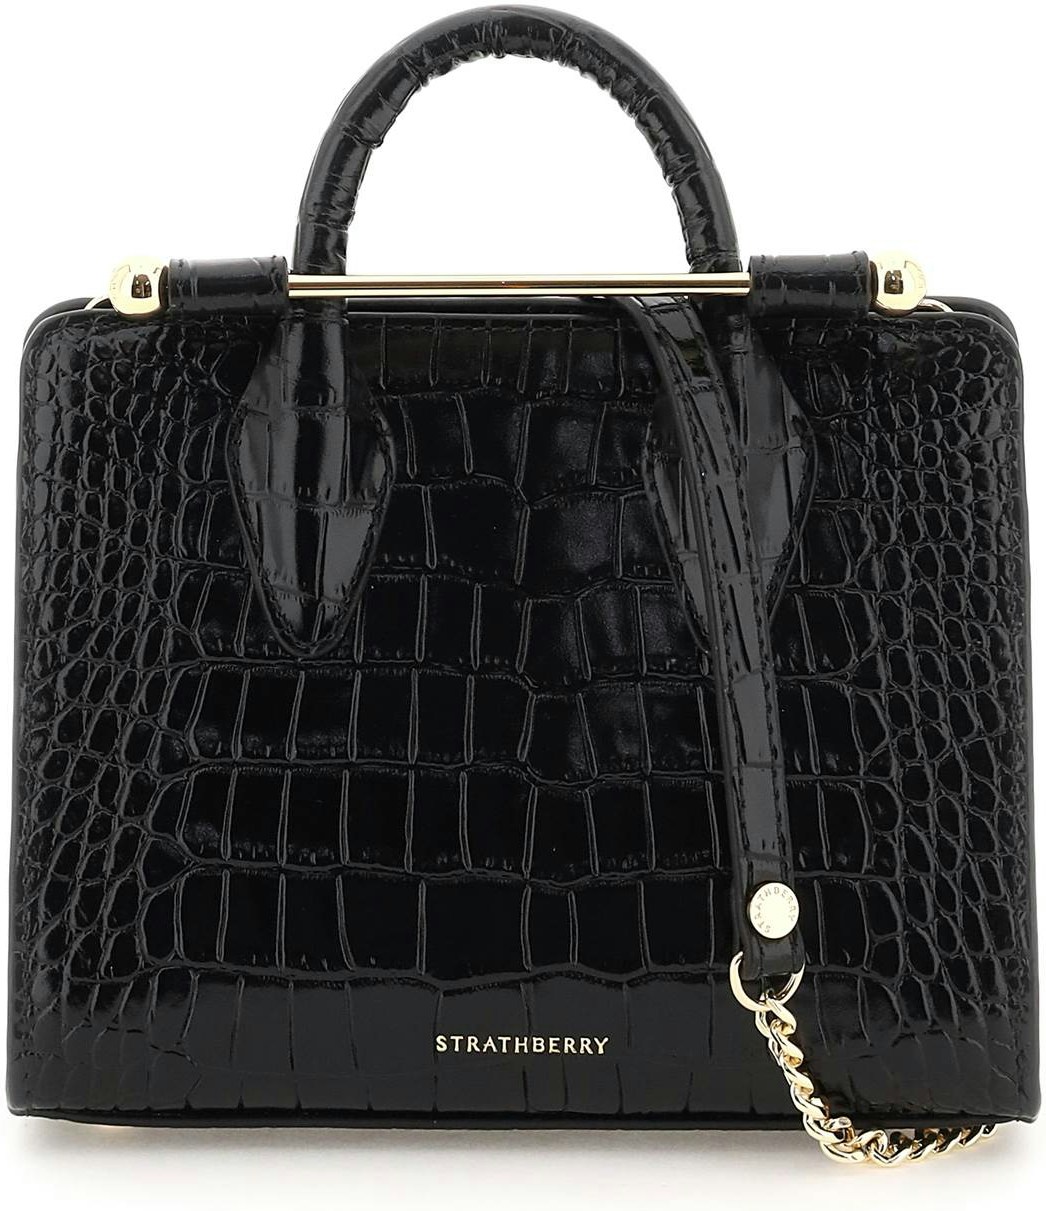 Strathberry 'Nano Tote' Croco-Embossed Leather Bag - Os Black